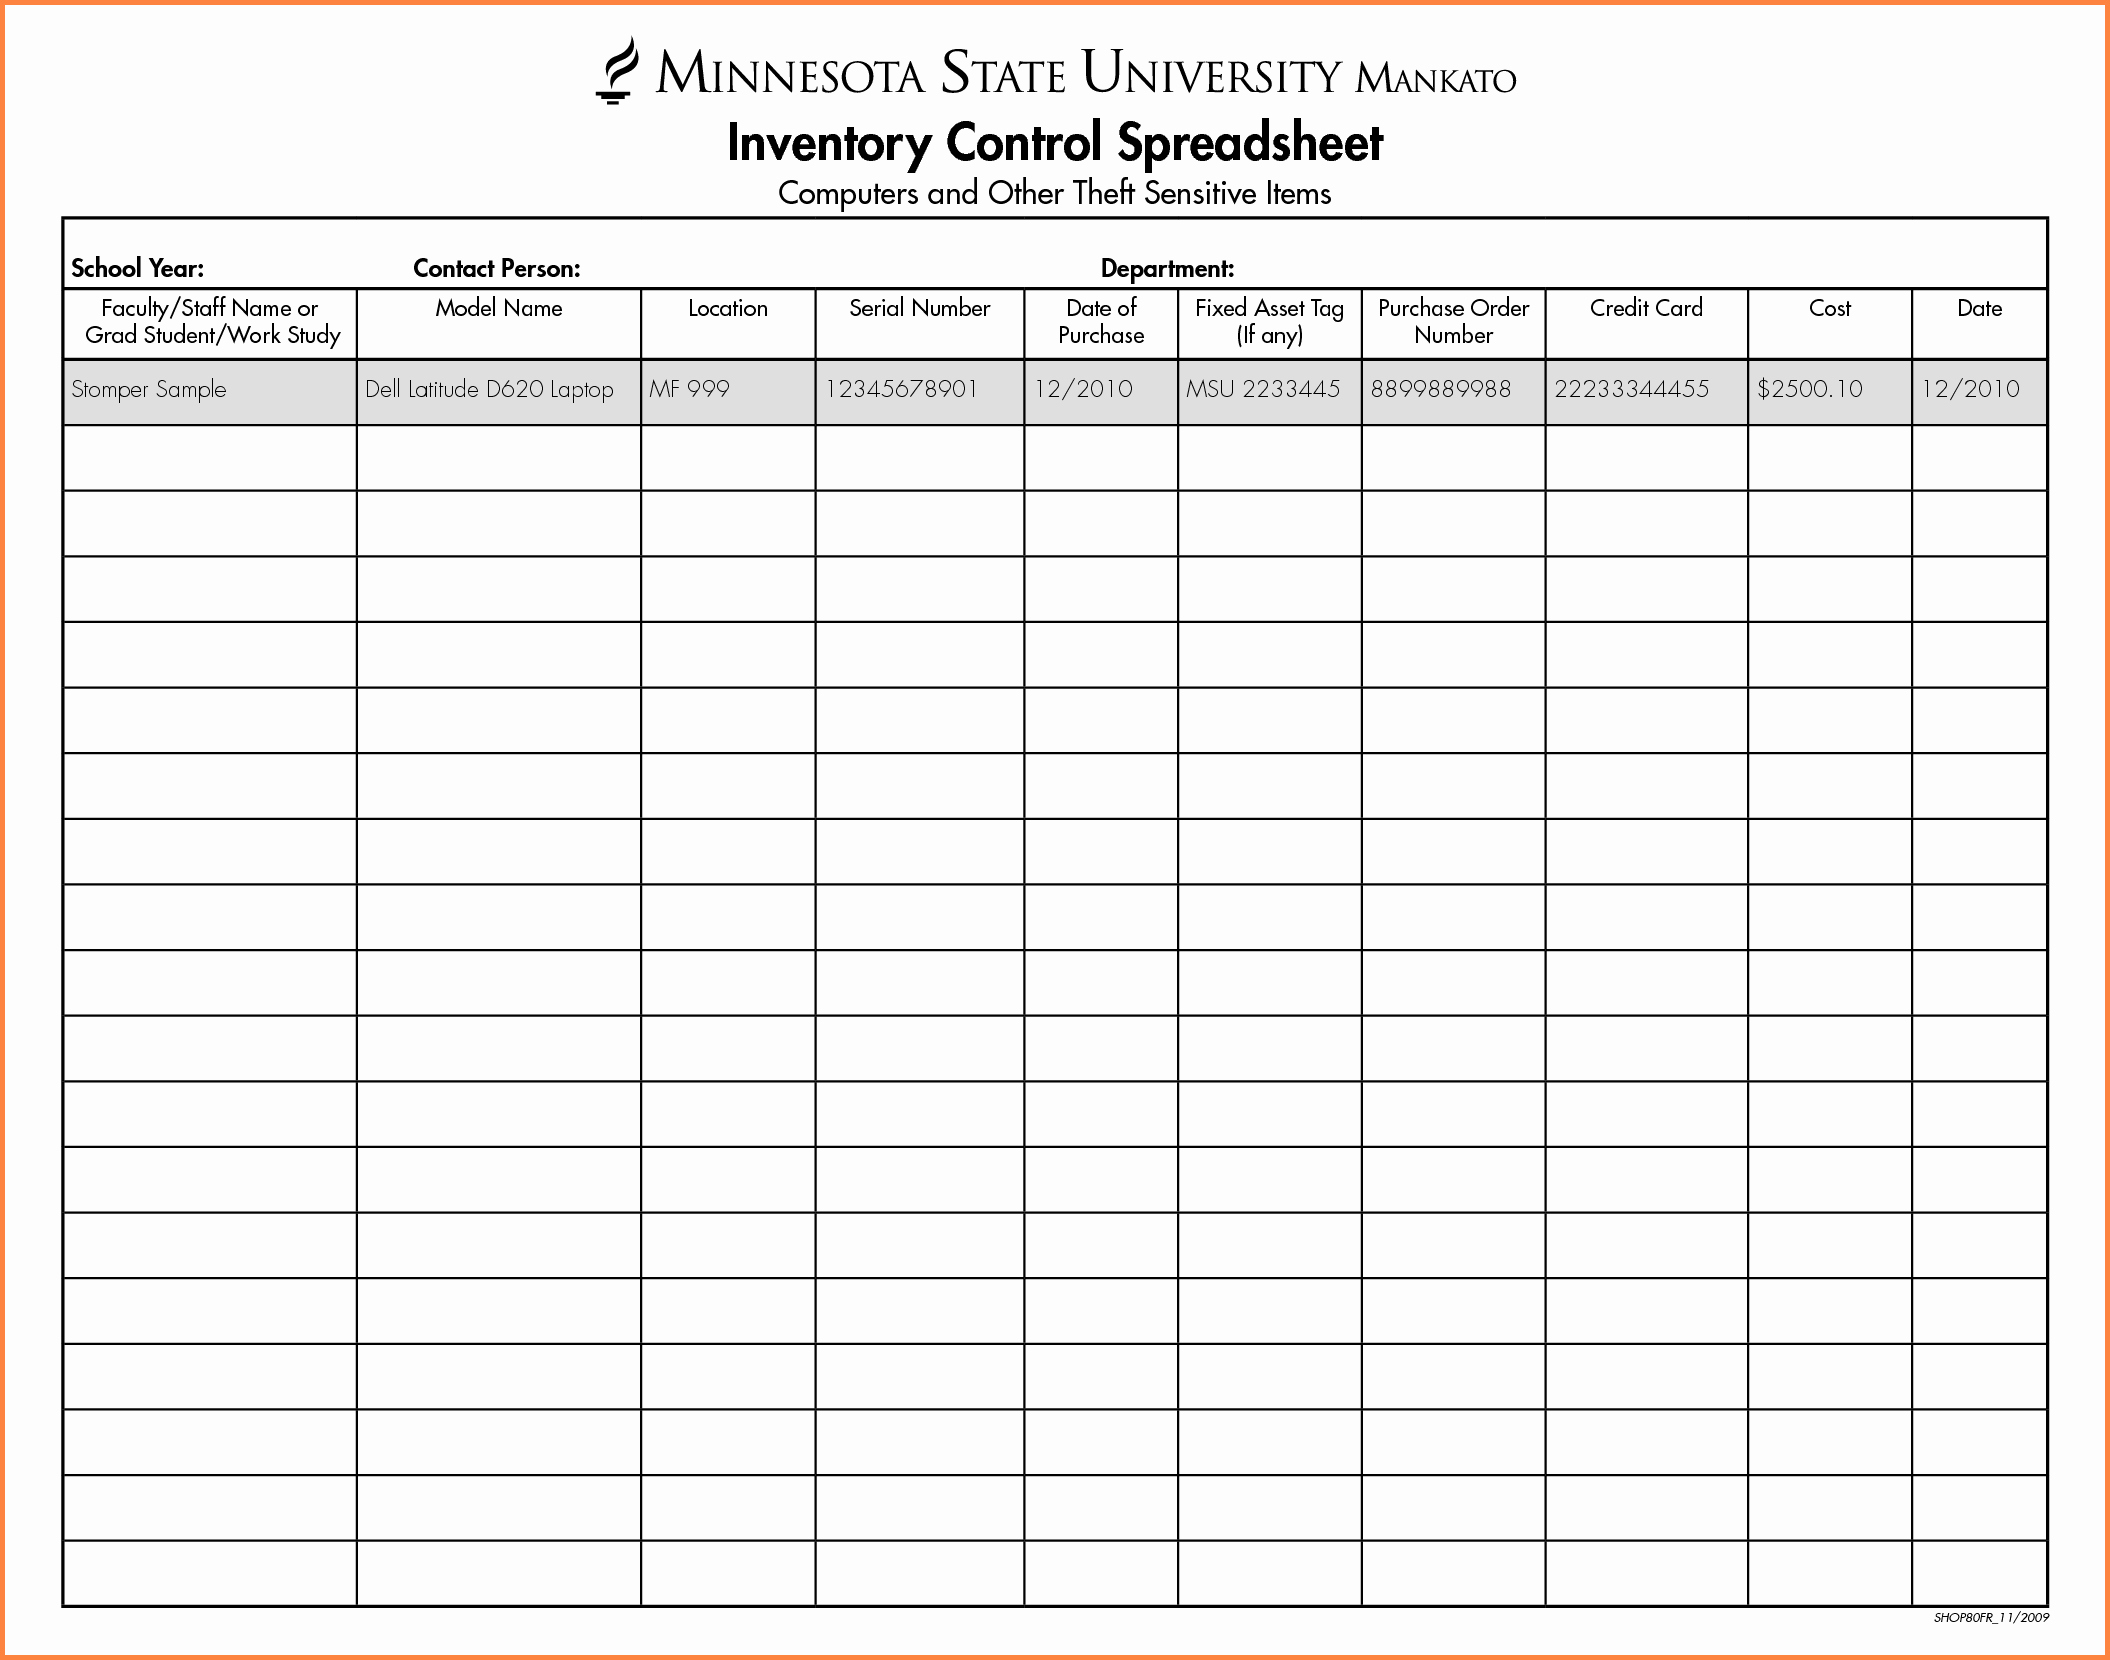 Inventory Control Spreadsheet Template Free Awesome 5 Spreadsheet Inventory Template